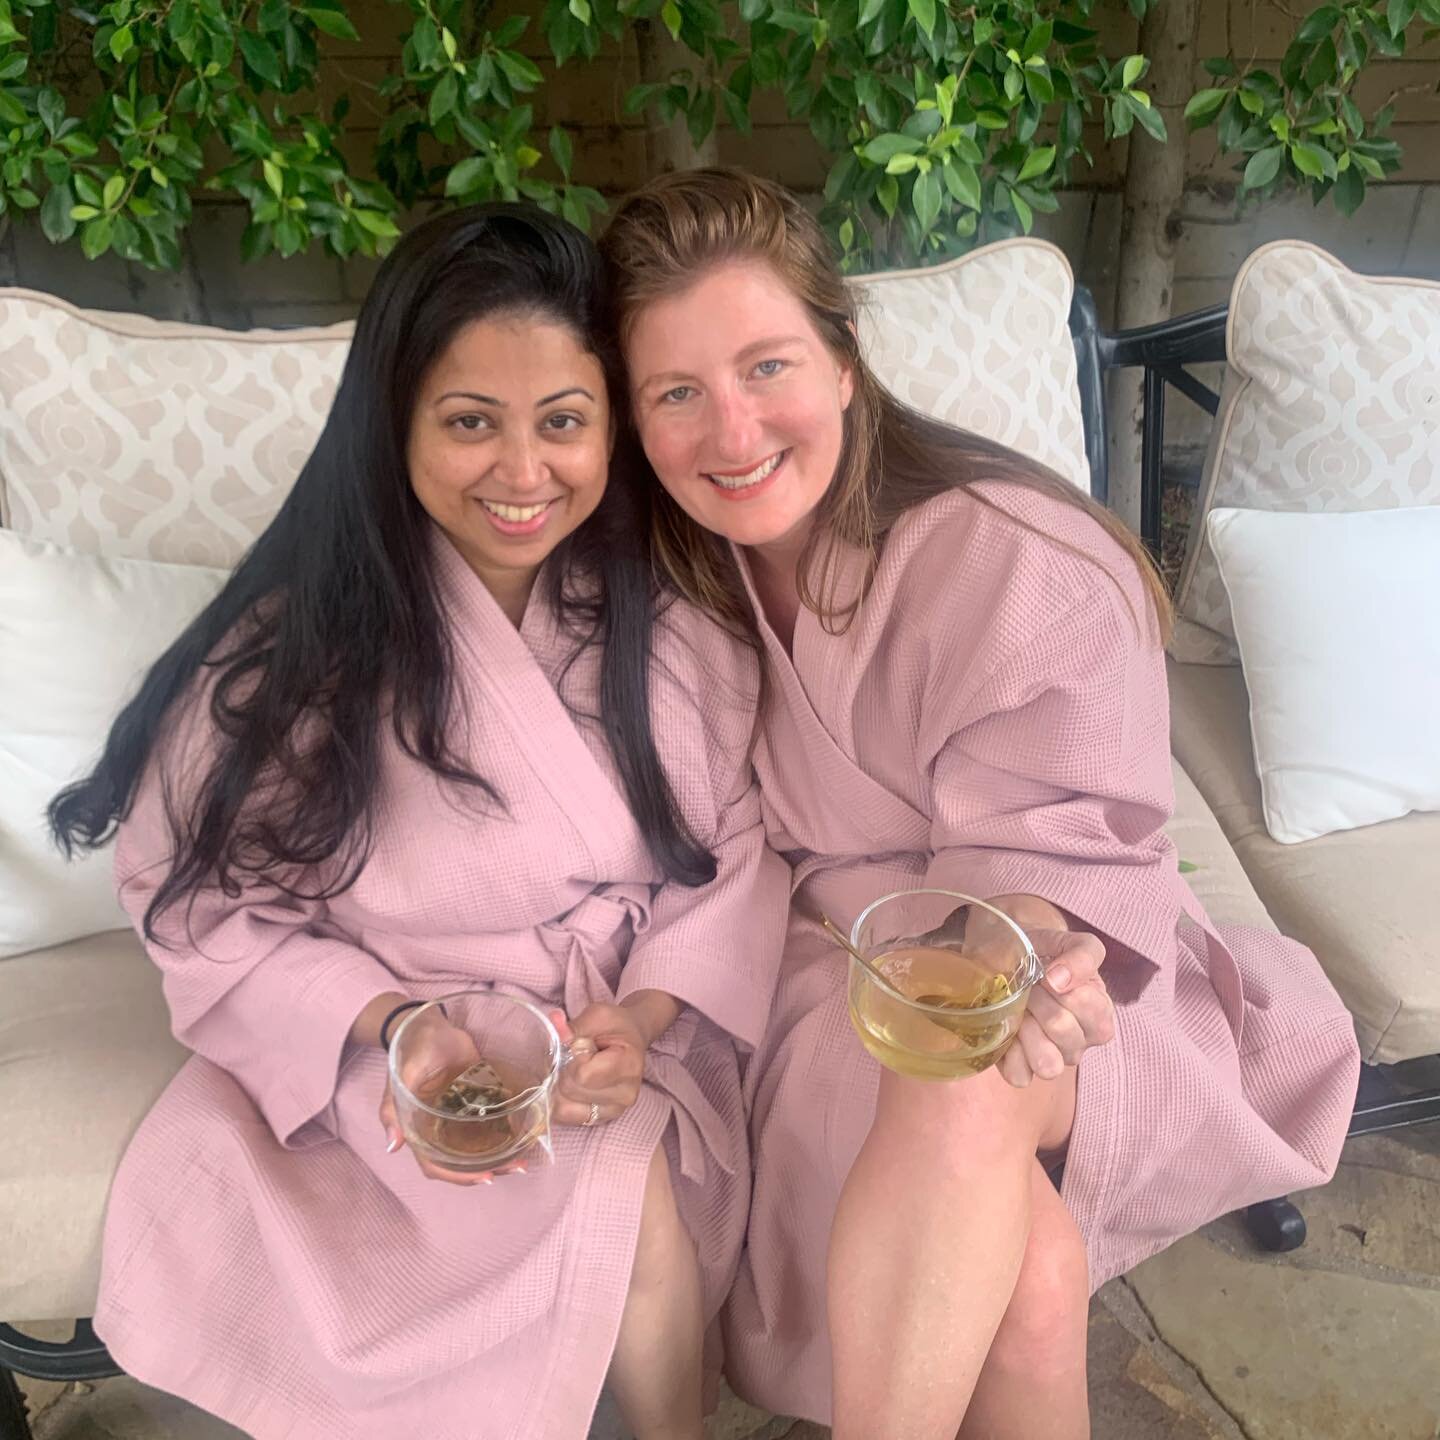 Girls day!!! Get together with your closest friends! Our previous guests enjoyed a chocolate massage, a rose sugar body scrub and a Circadia chocolate facial along with some Vahdam tea. Create lifetime memories with lifelong friends at lotus home! 💗